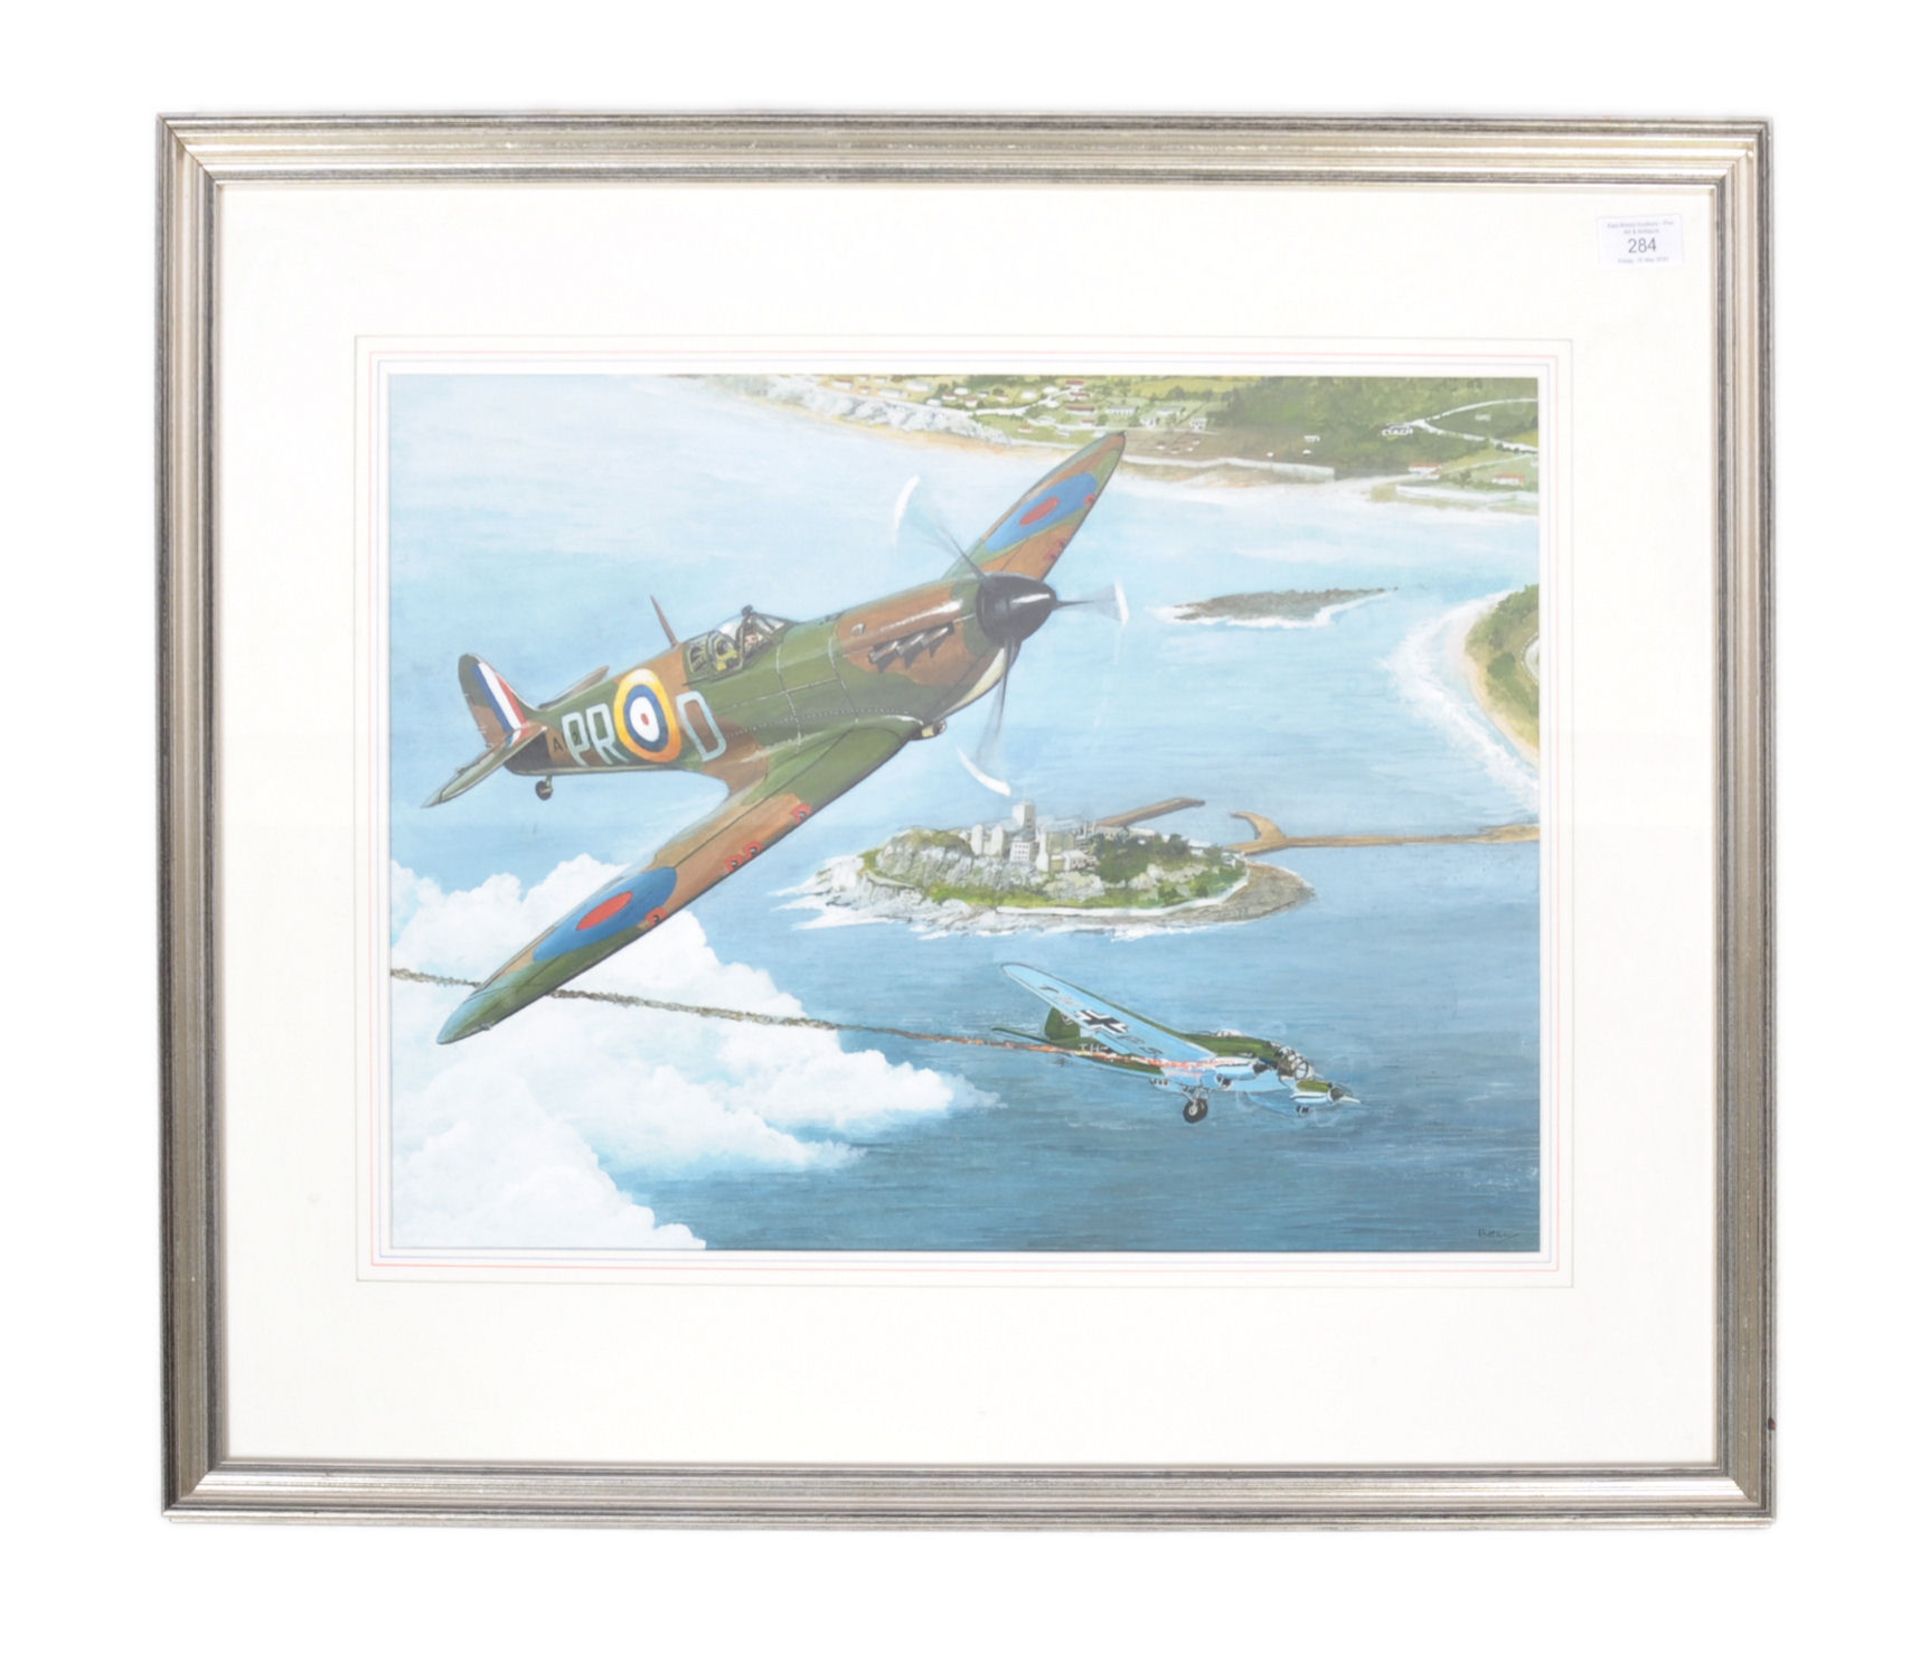 GEOFFREY BELL - WW2 SPITFIRE DOGFIGHT - WATERCOLOUR PAINTING